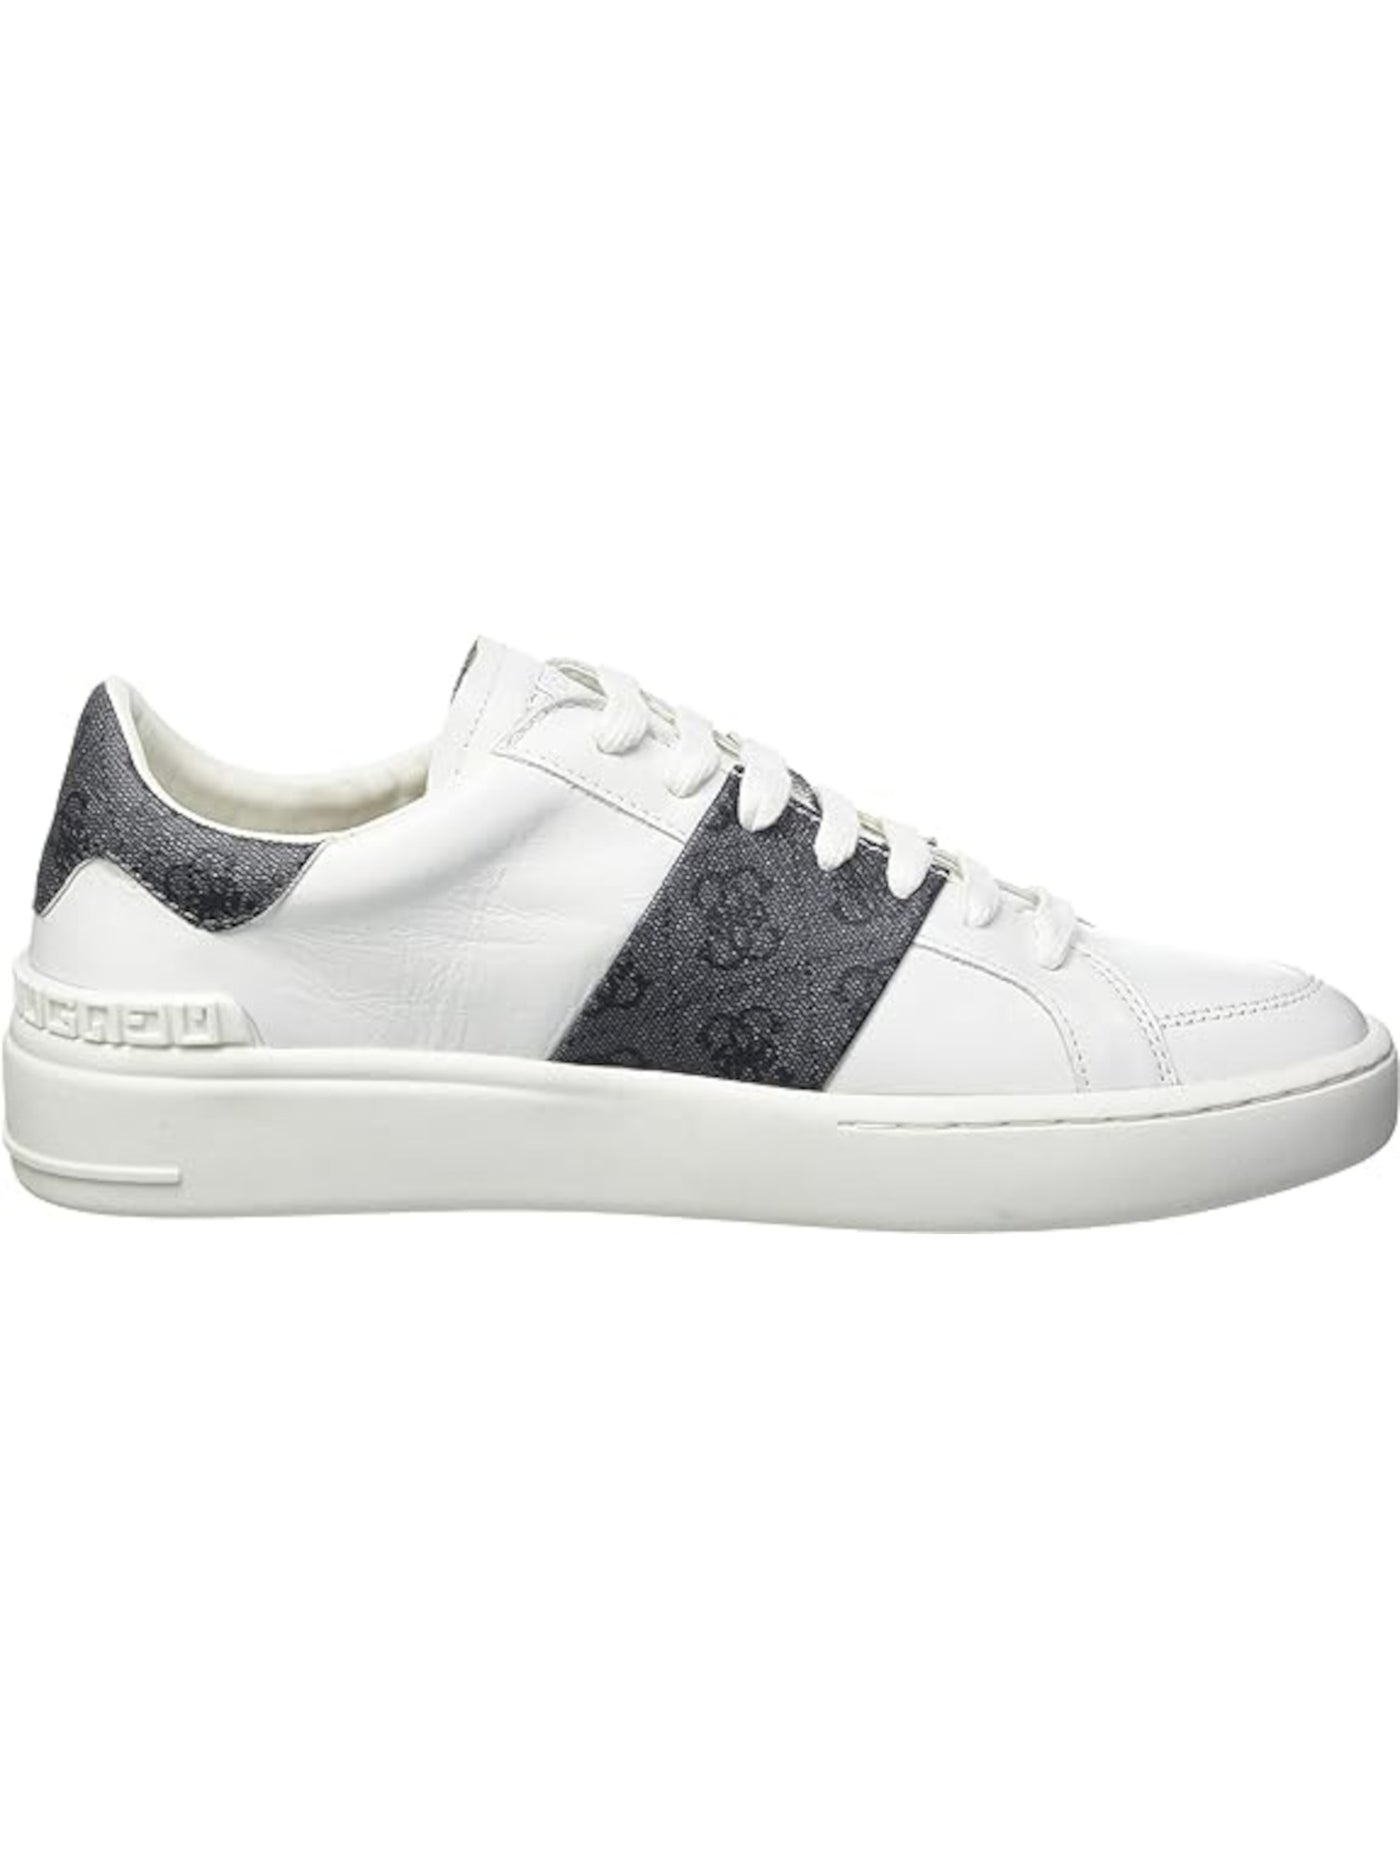 GUESS Mens White Colorblocked Stripe Gymnastics Shoe Padded Verona Round Toe Platform Lace-Up Leather Sneakers Shoes 8